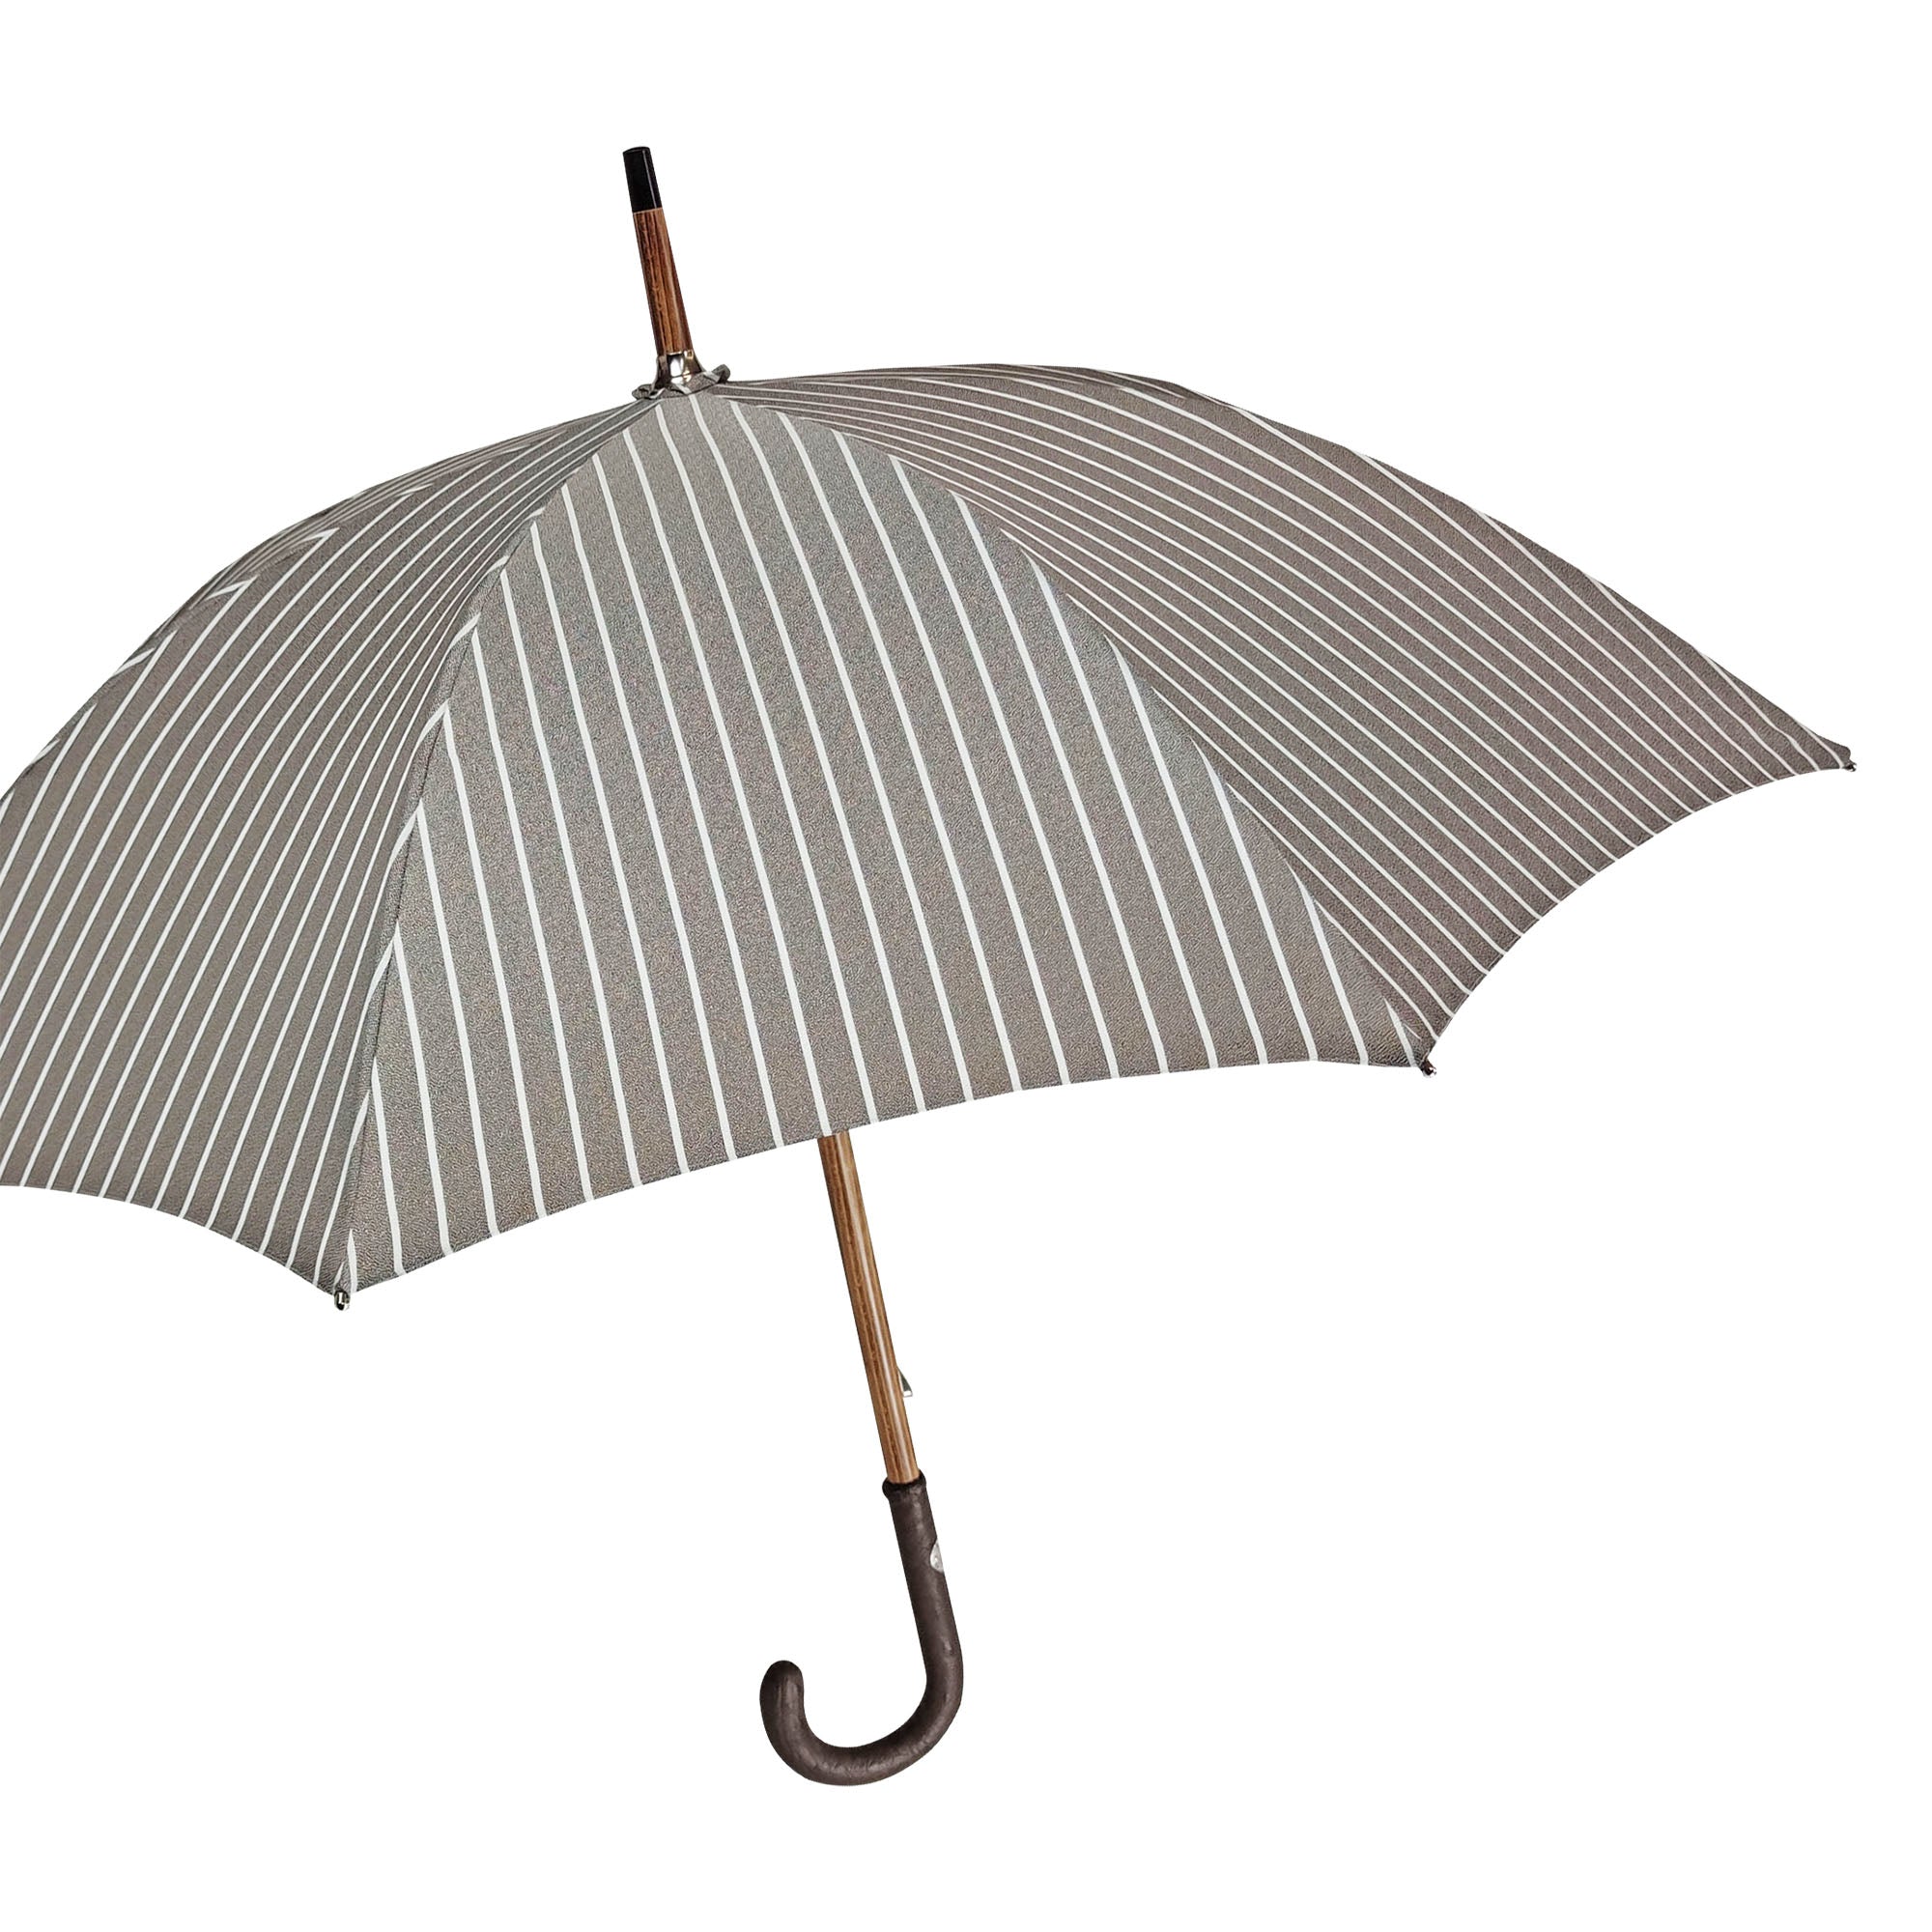 Classic Striped Umbrella with Ostrich leather handle